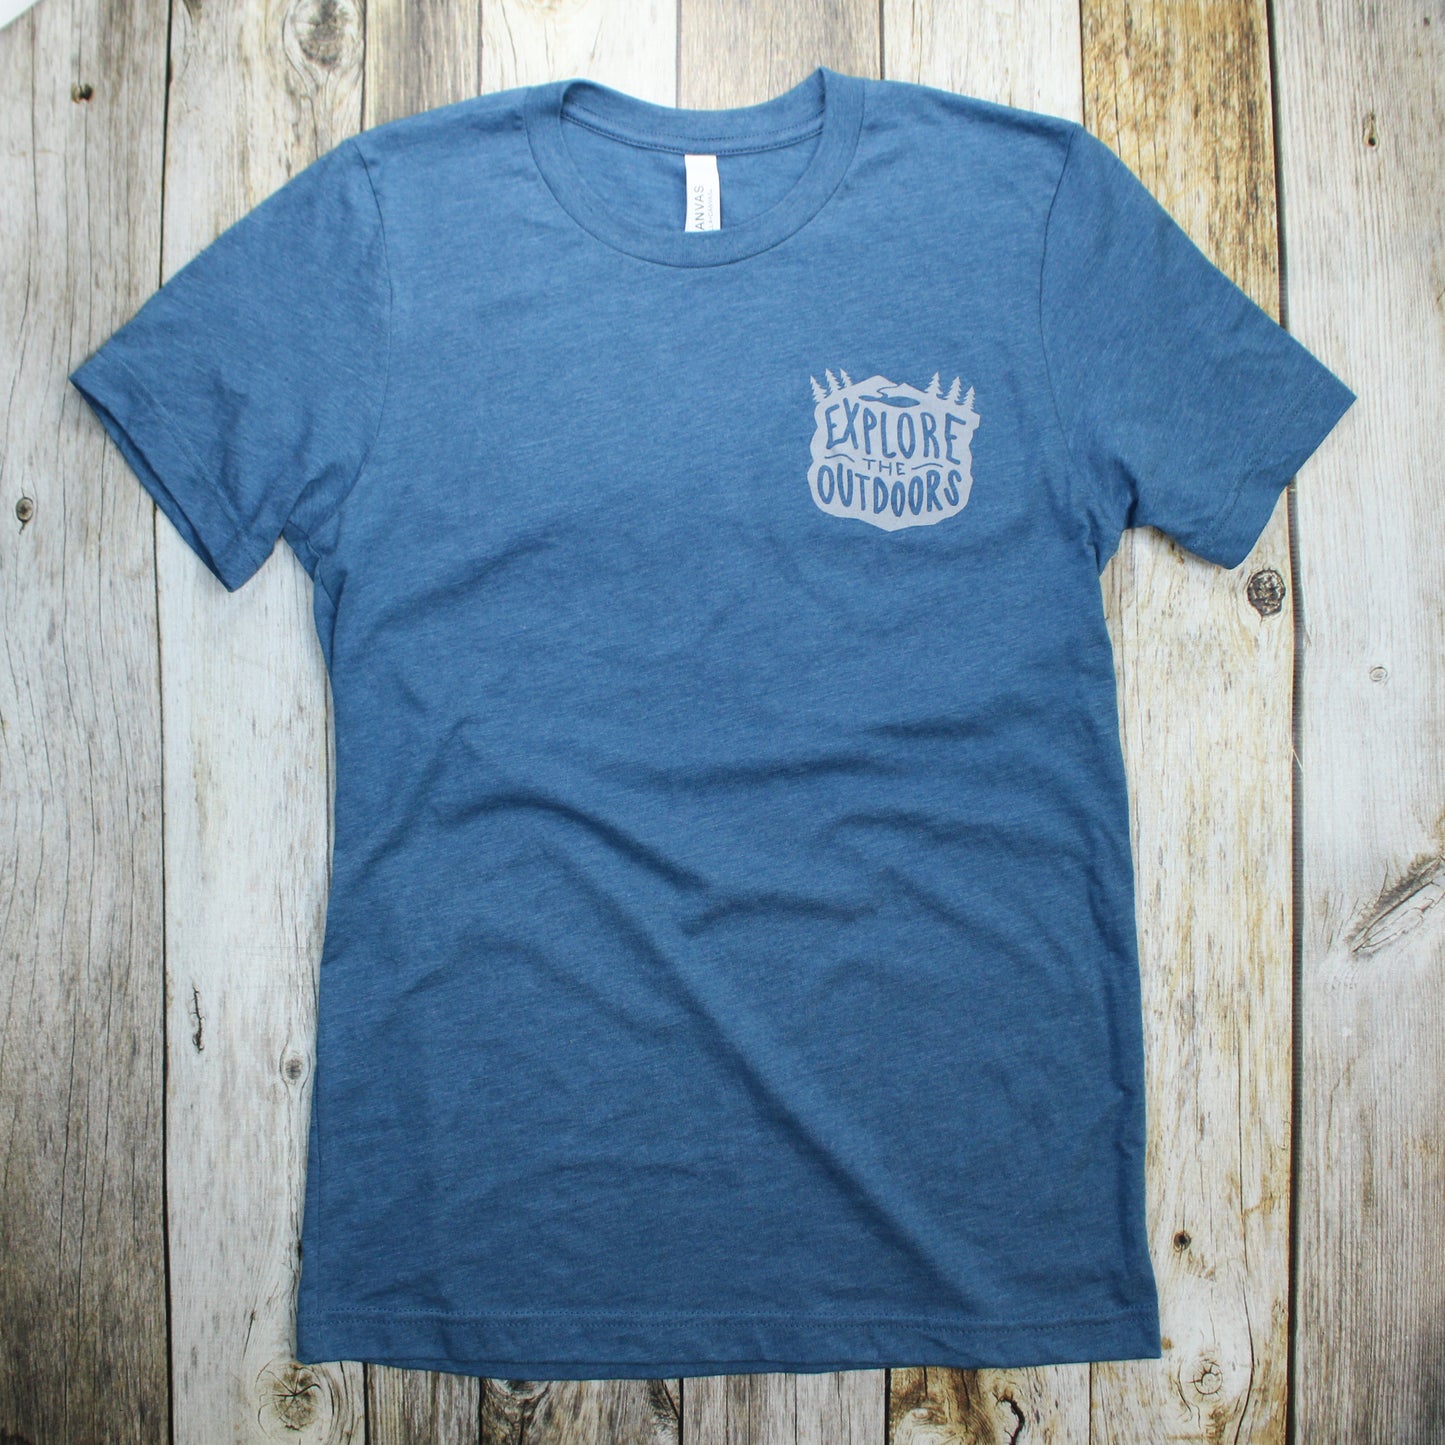 Cunningham Falls State Park (Teal) / Shirt - Route One Apparel